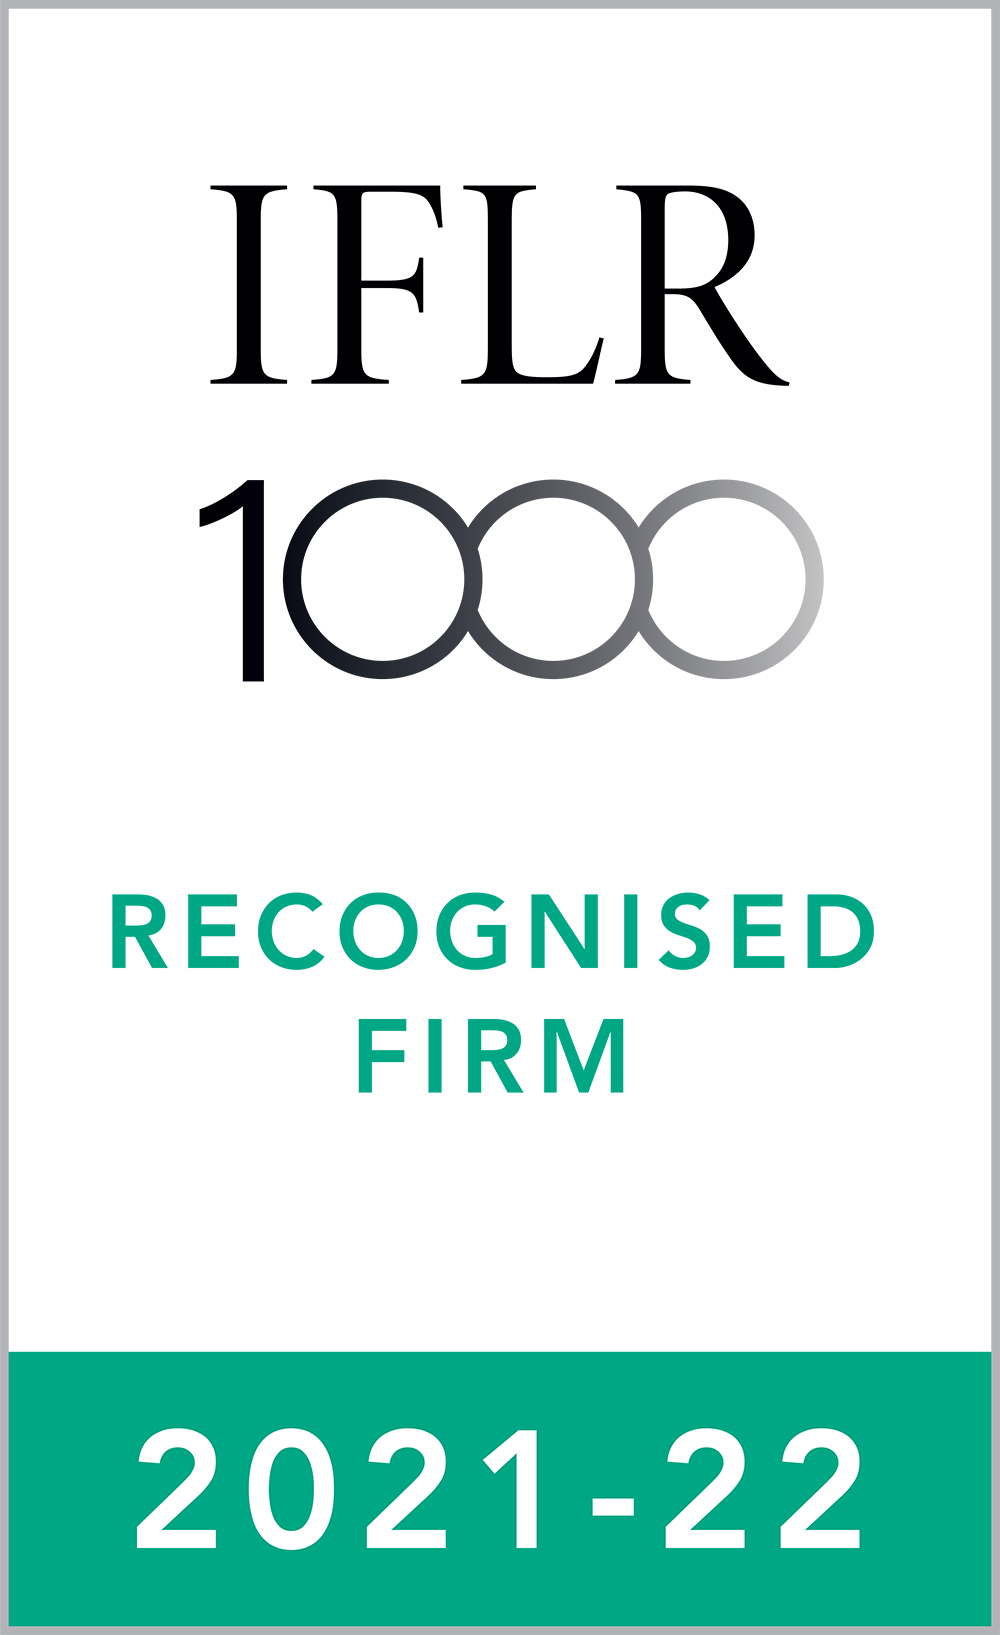 Ranked "Notable Firm" in Capital Markets: Equity, Capital Markets: Debt, M&A , Restructuring and Insolvency by IFLR1000 2021-22